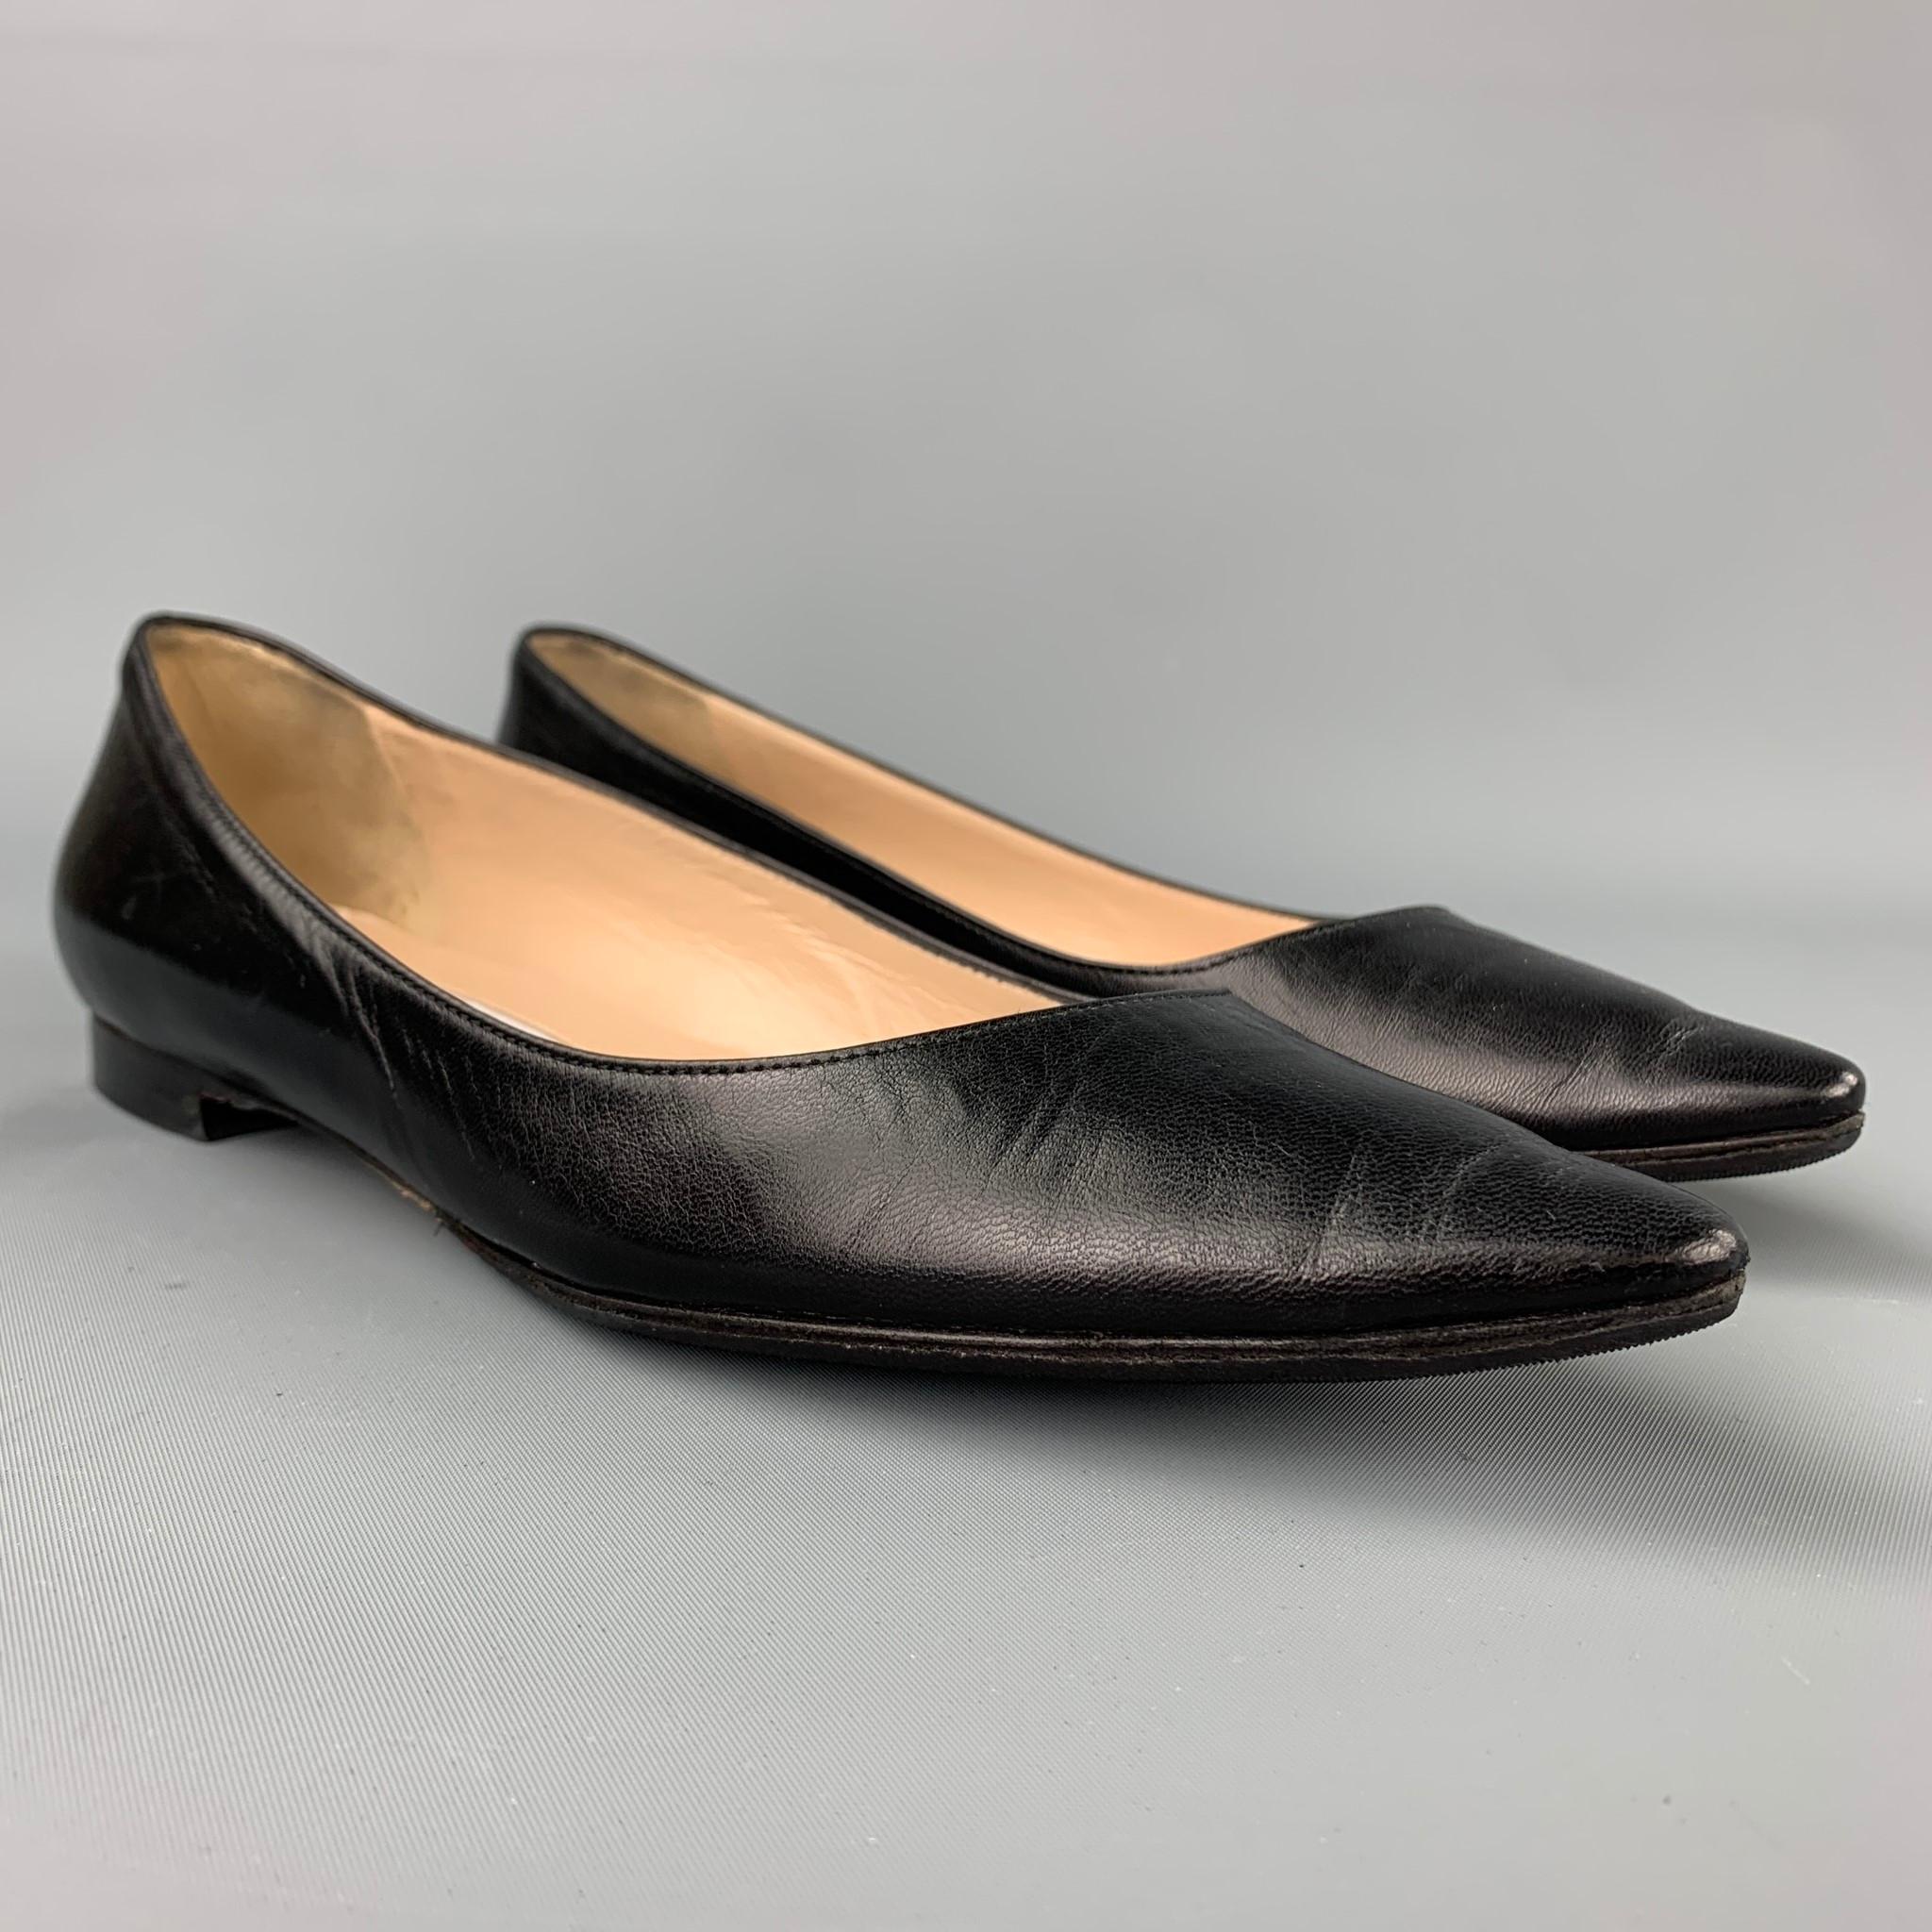 MANOLO BLAHNIK flats comes in a black leather featuring a pointed toe and a wooden heel. 

Very Good Pre-Owned Condition.
Marked: 38
Original Retail Price: $645.00

Outsole: 10.5 in. x 3 in. 